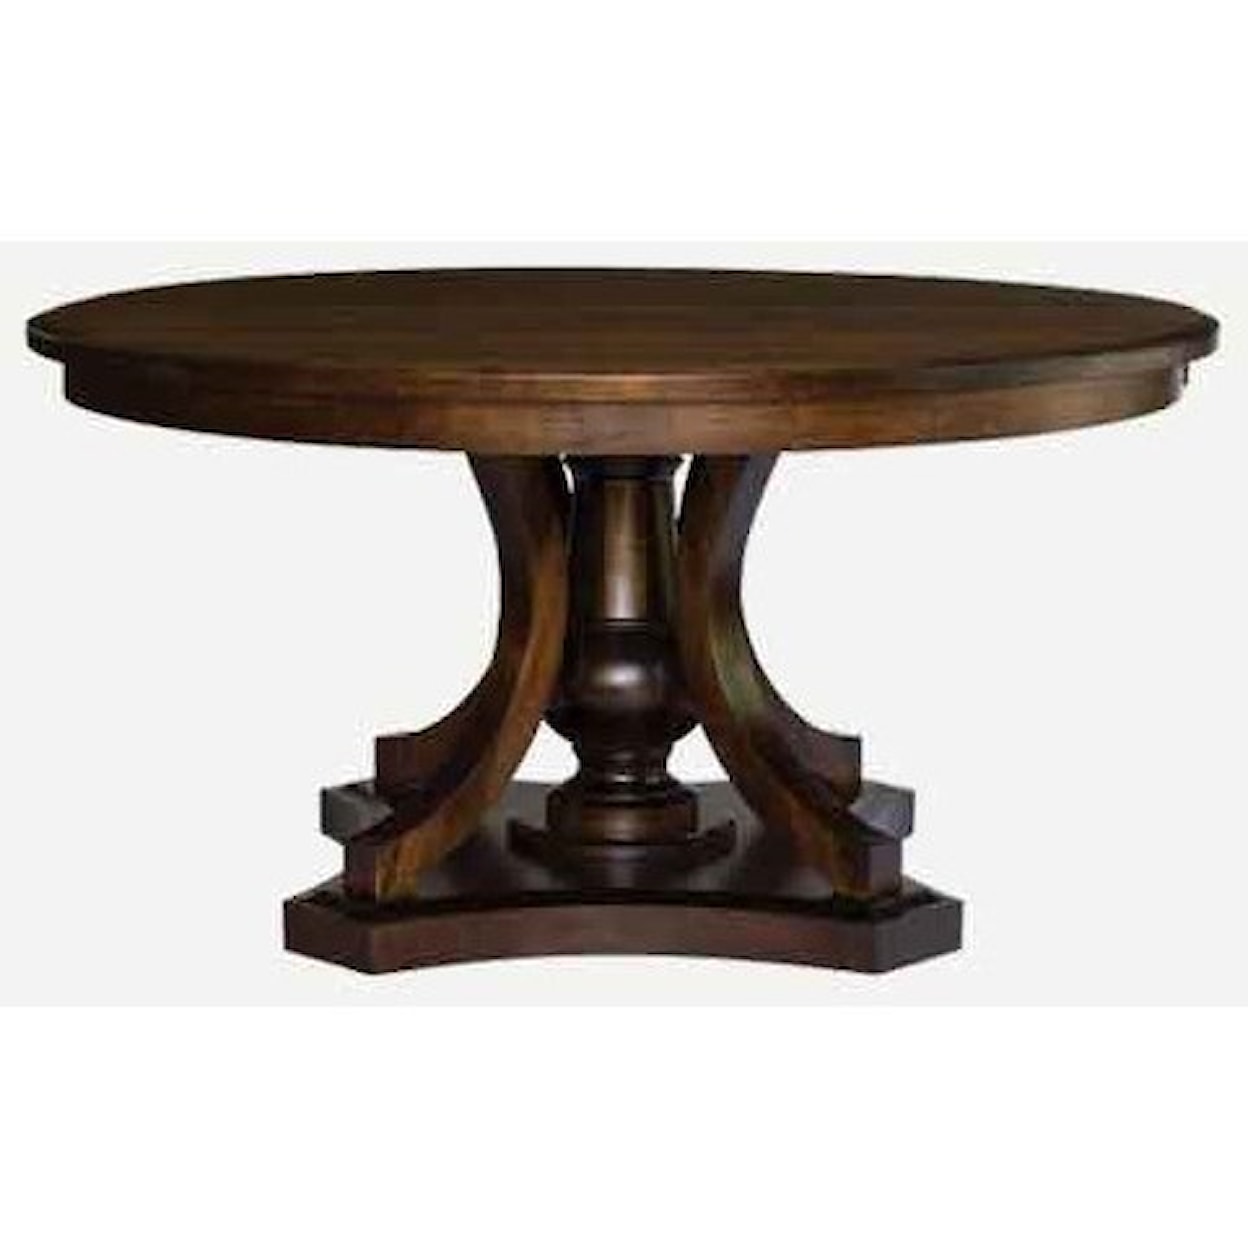 Amish Impressions by Fusion Designs Arabella Solid Wood Customizable Round Pedestal Table